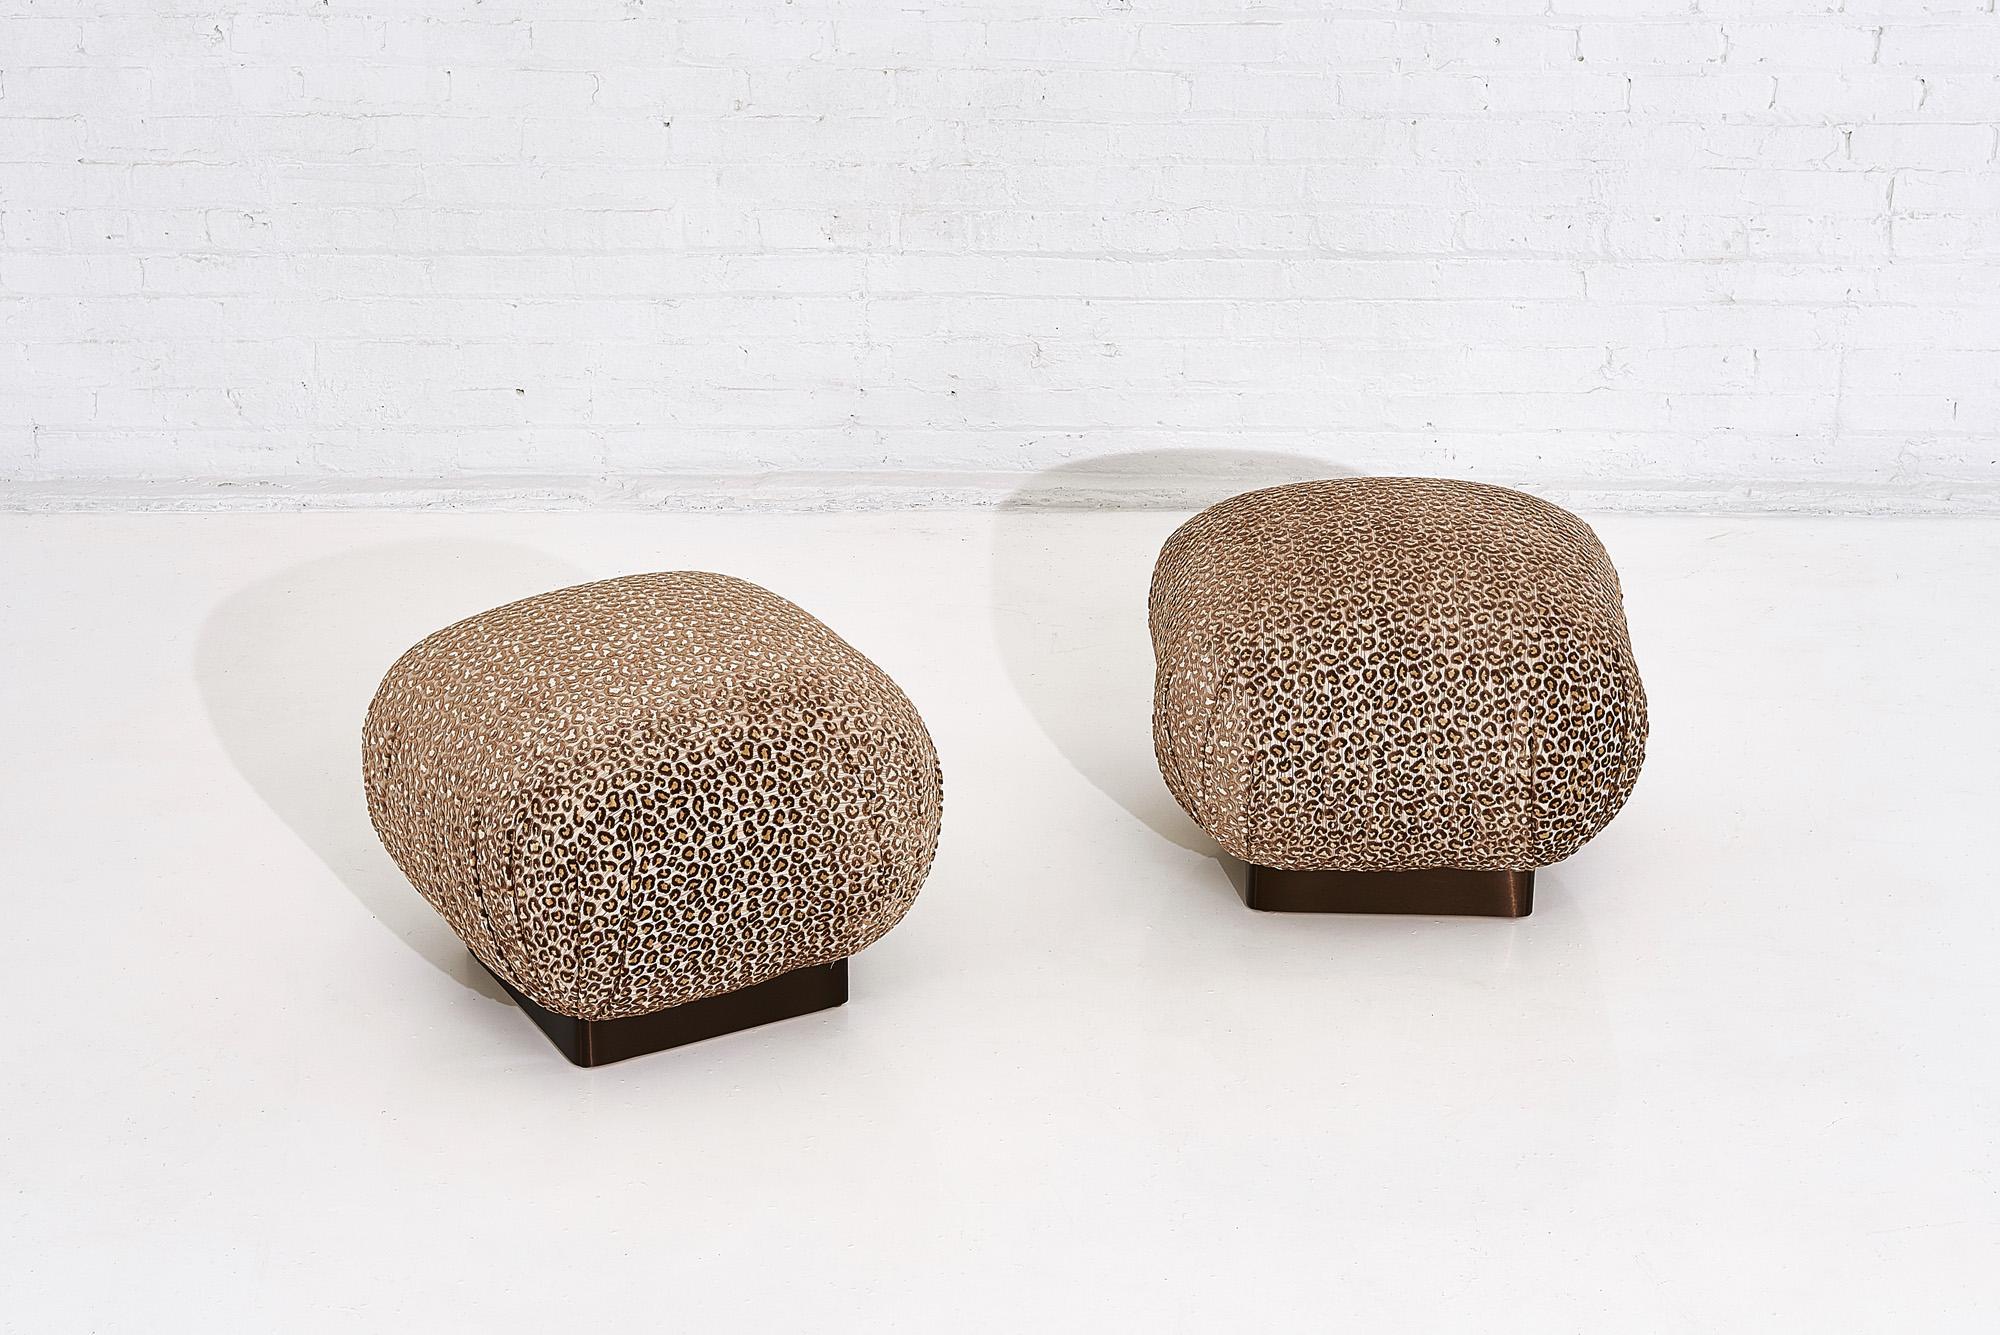 Pair of Soufflé pouf ottomans, stools on bronze bases with leopard upholstery.